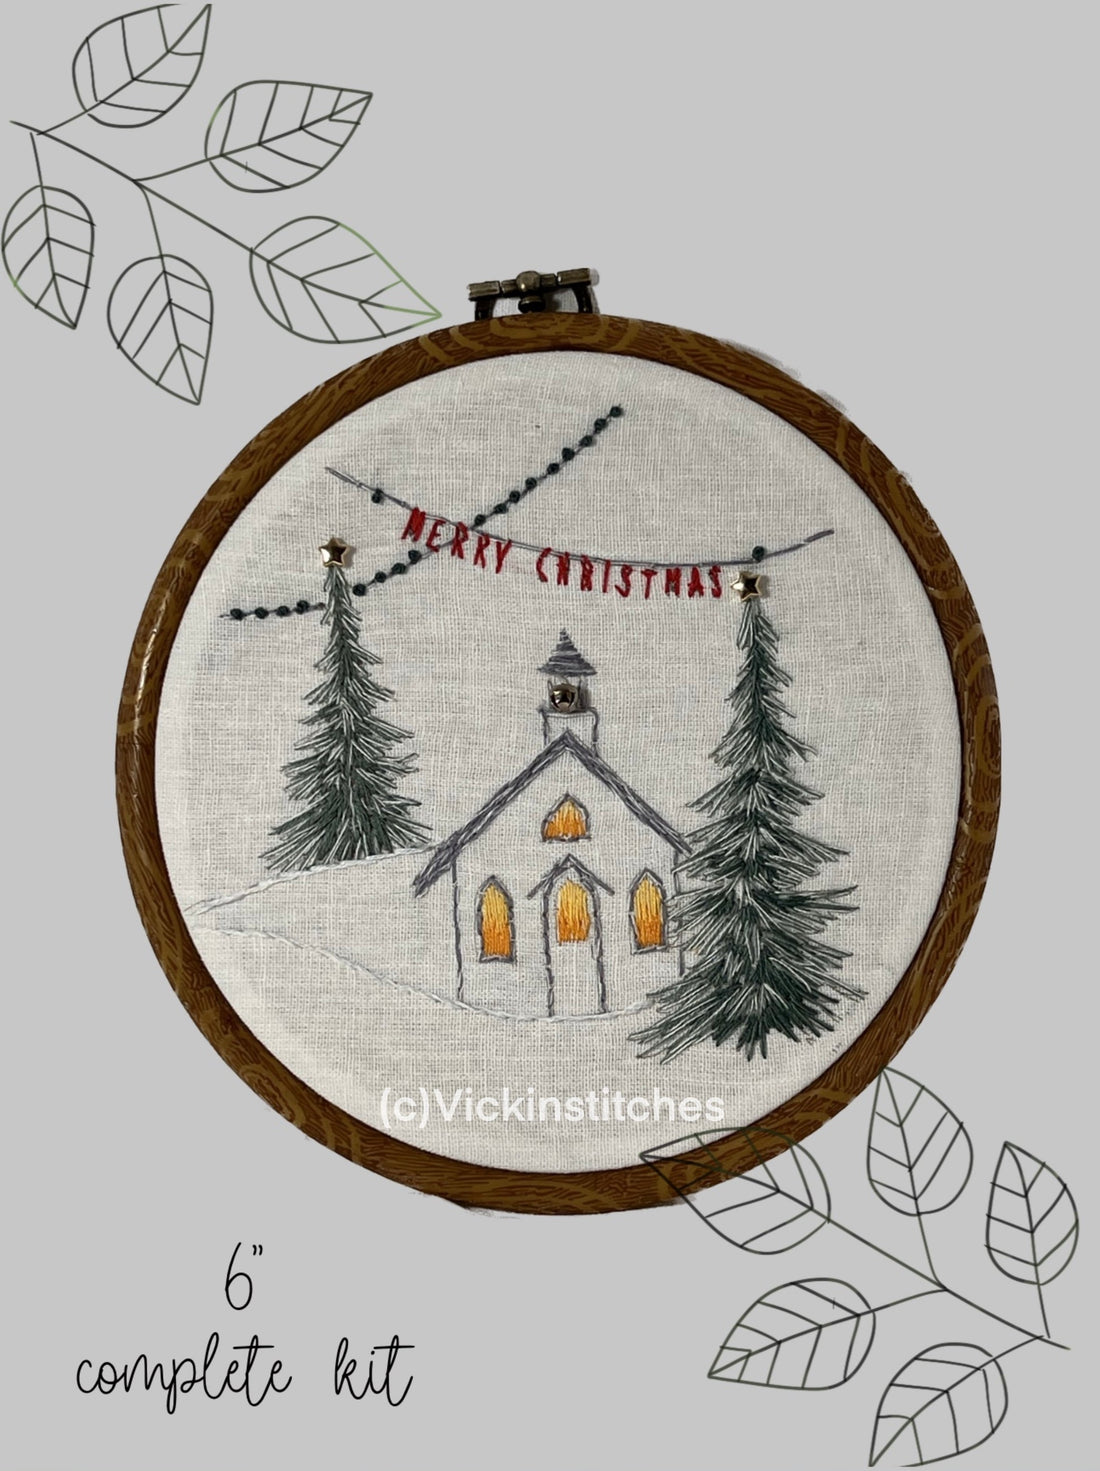 Winter Serenity: The Christmas Church Embroidery Kit